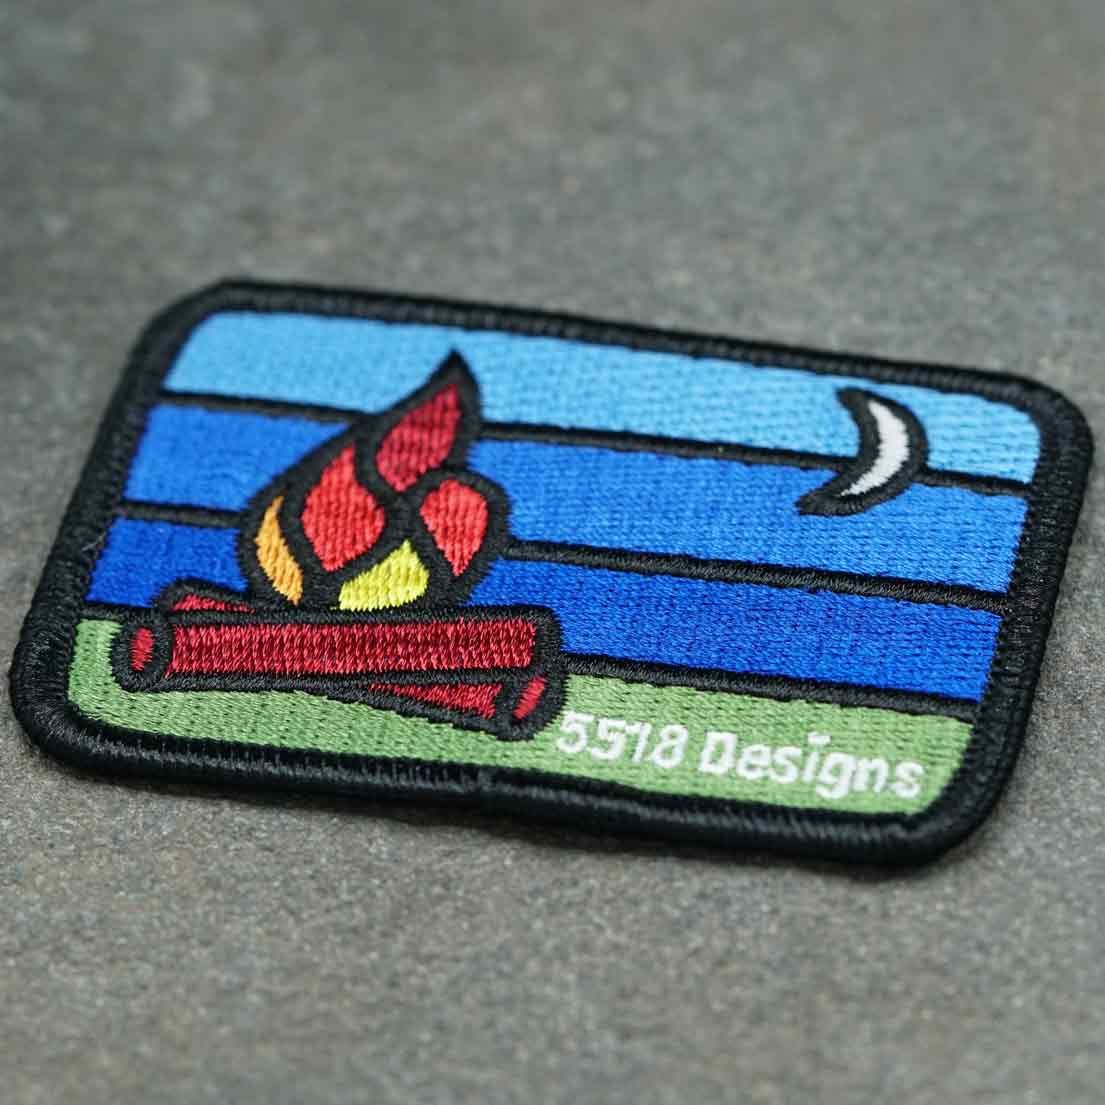 Iron on patches on Velcro gear? : r/Patches